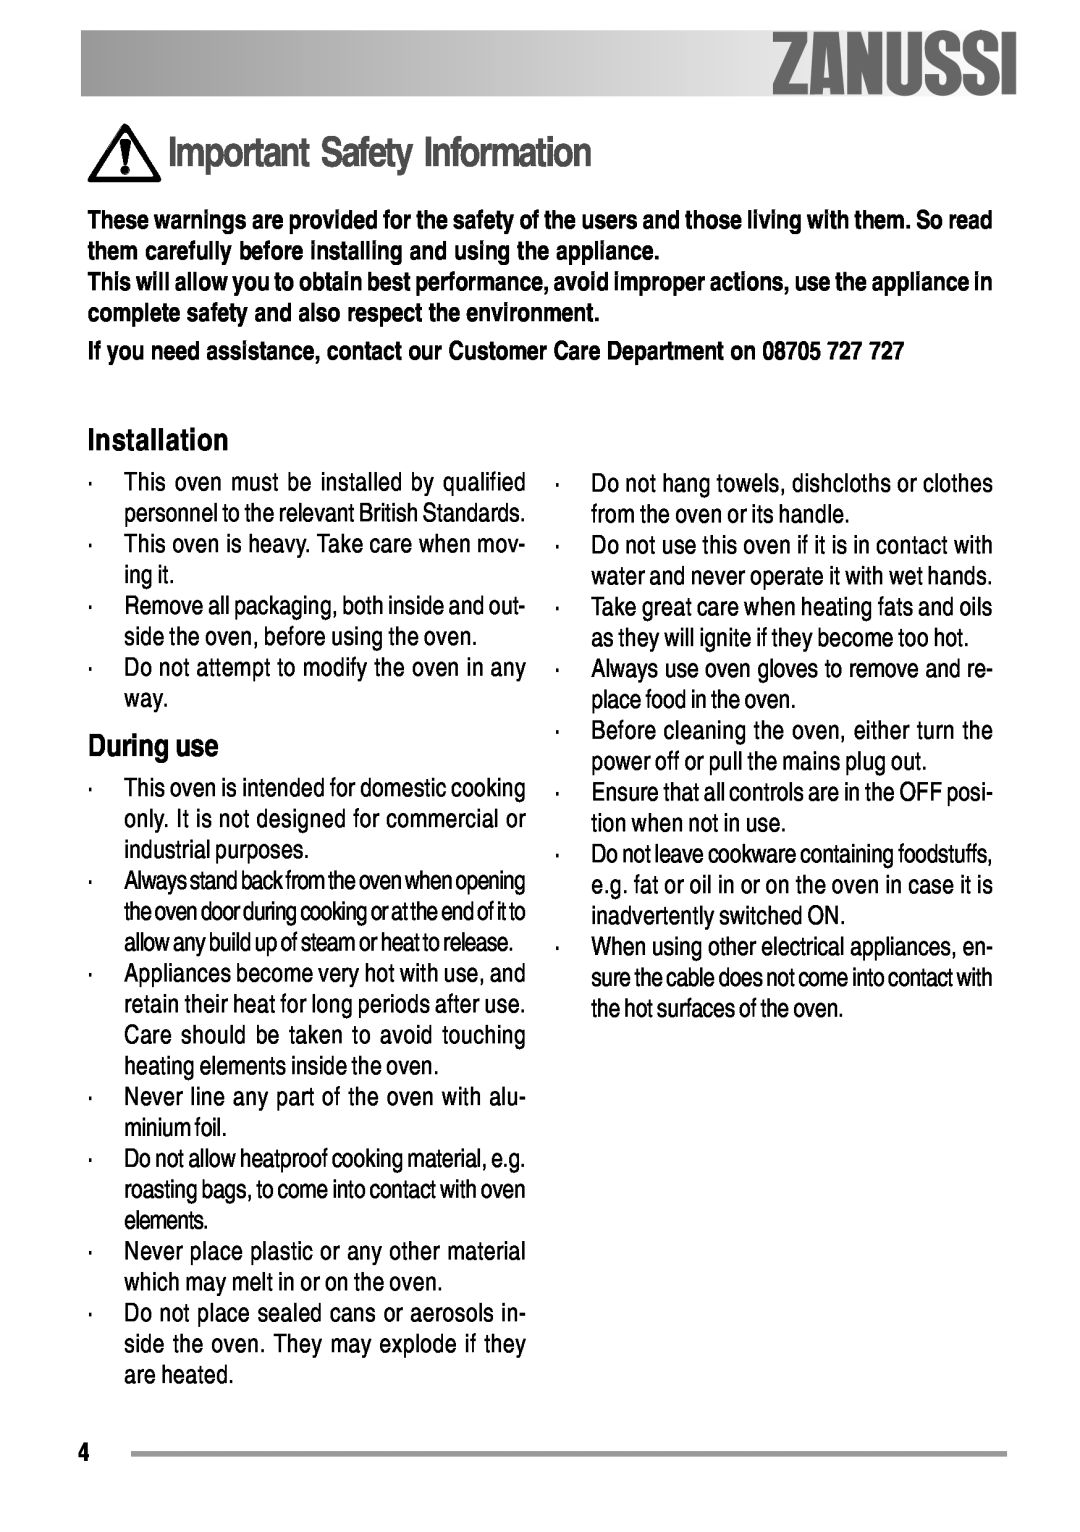 Zanussi ZOB 550 user manual Important Safety Information, Installation, During use 